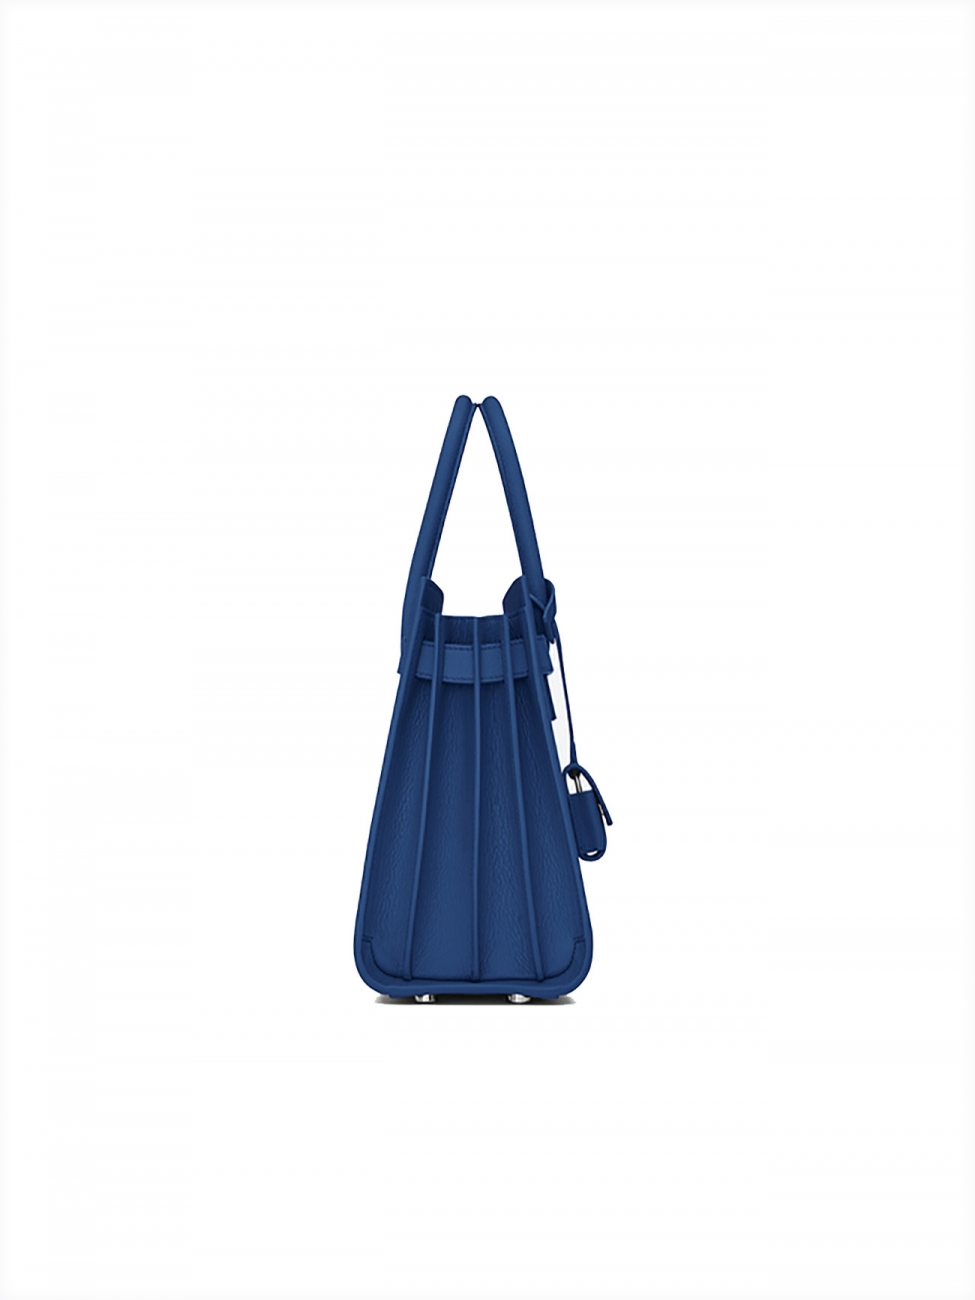 Classic Small Sac De Jour Bag In Royal Blue Crocodile Embossed Leather